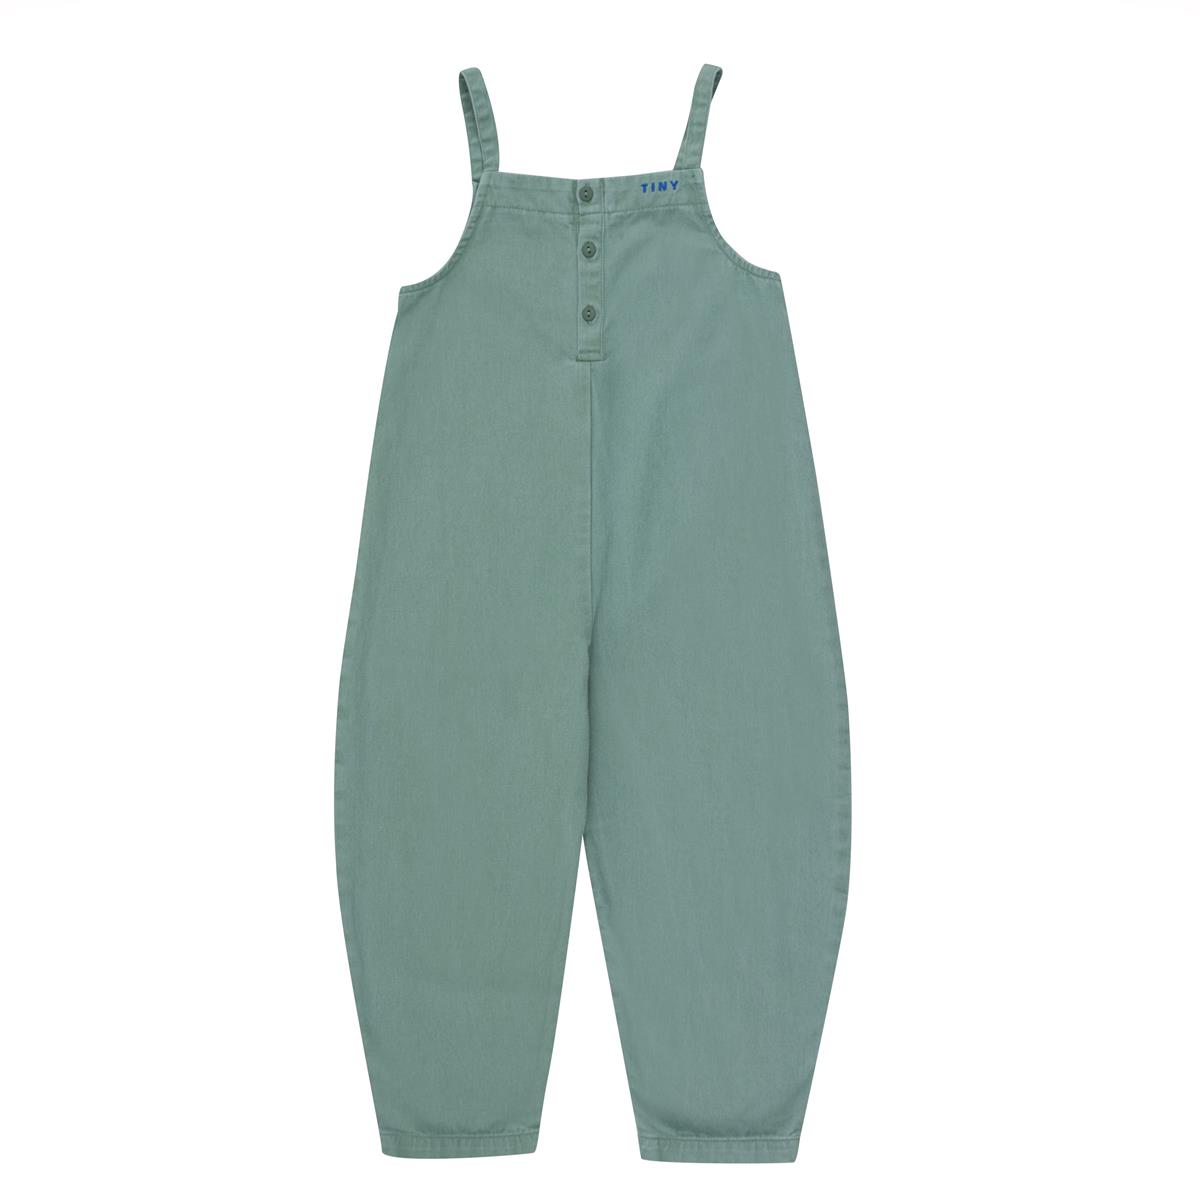 Tinycotttons - SOLID DUNGAREE light teal